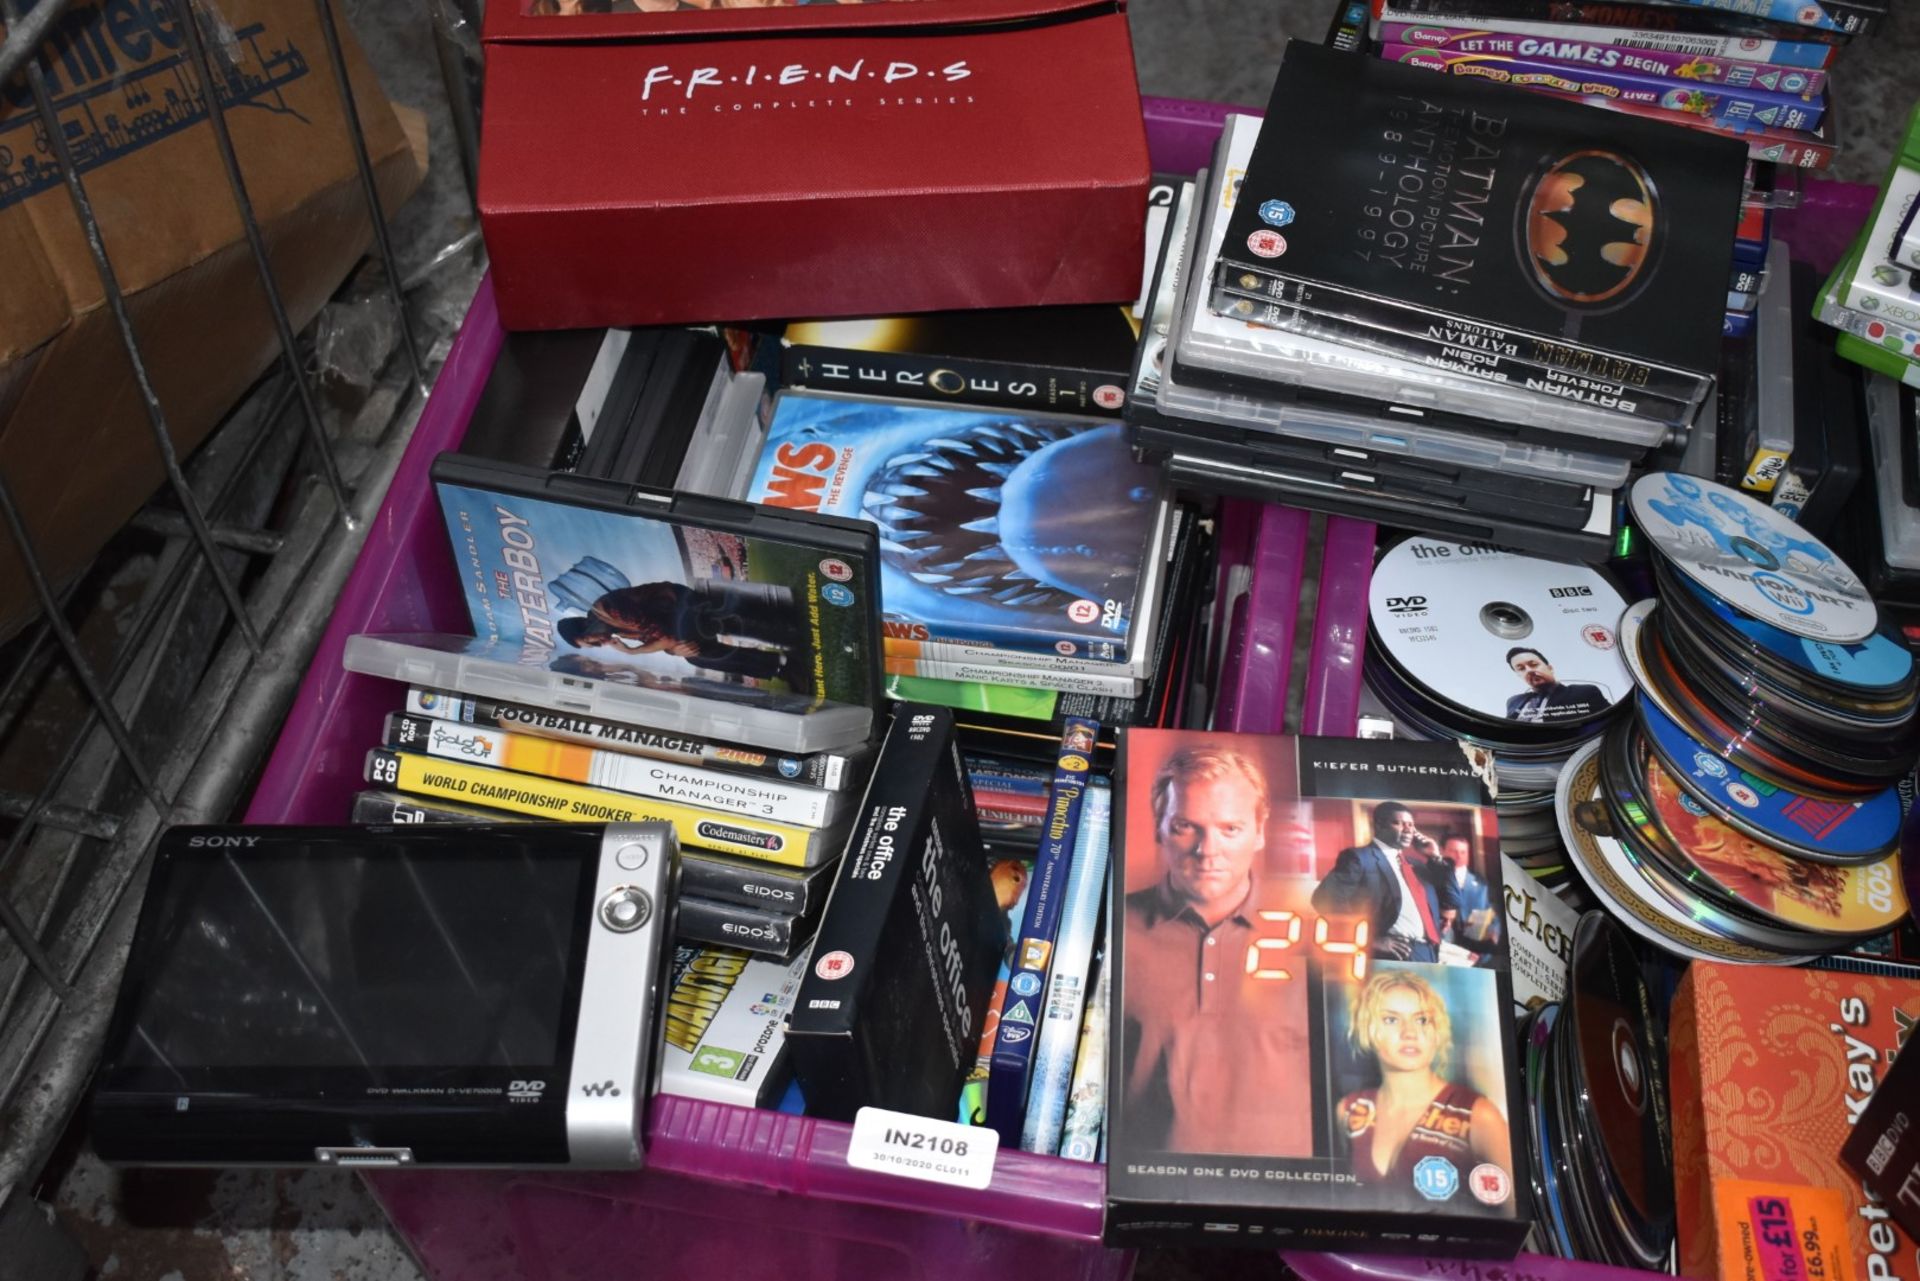 1 x Large Collection of DVD Films and Games - Plus Box Sets and Portable DVD Player - Ref: In2108 - Image 3 of 10